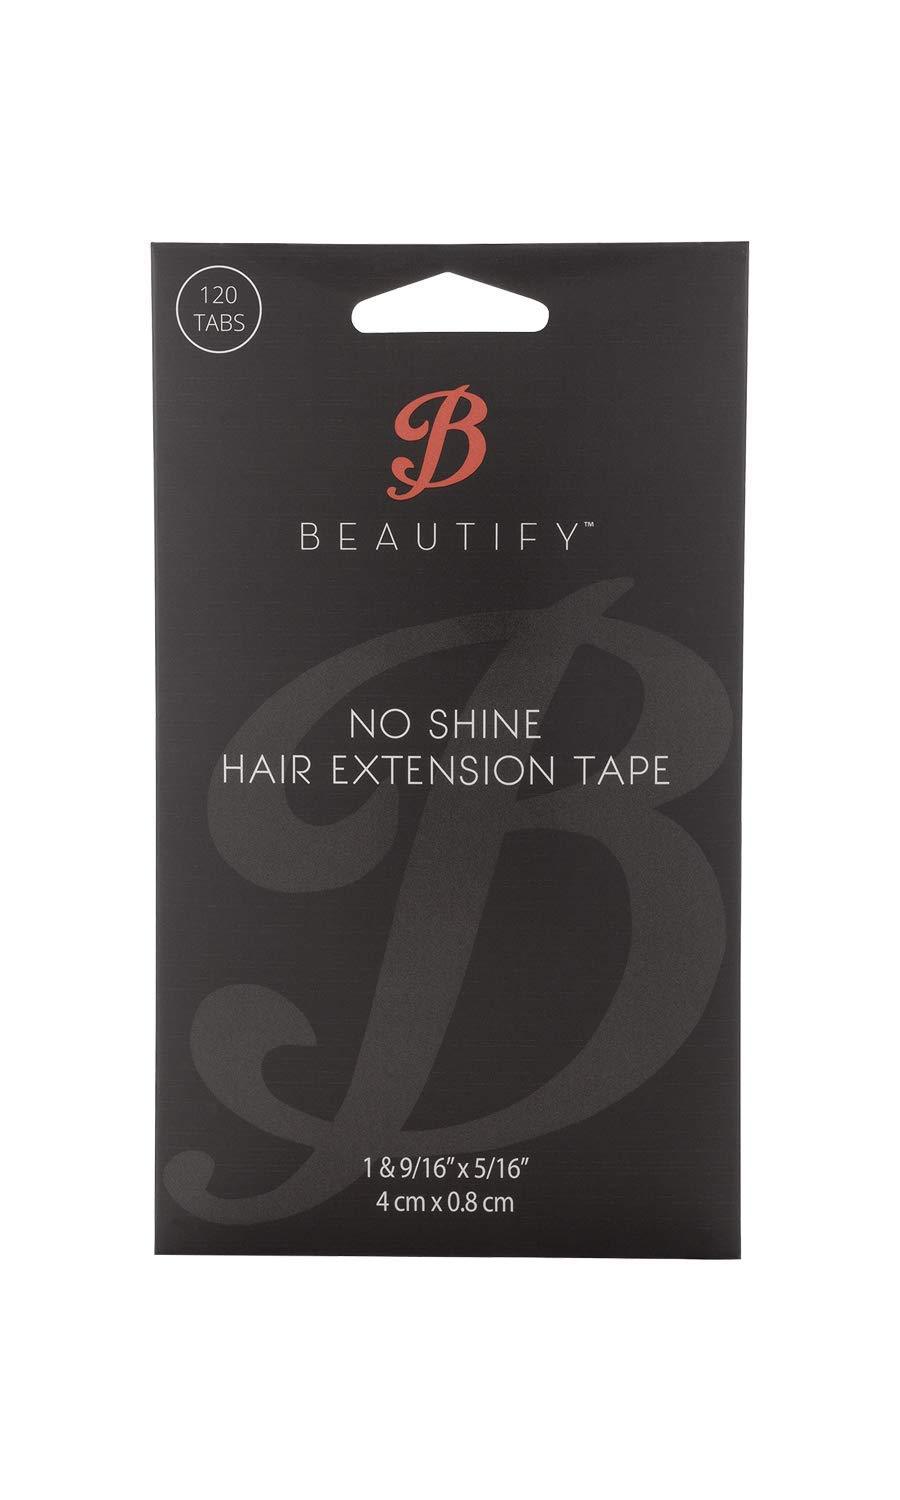 [Australia] - No Shine by BEAUTIFY Hypoallergenic Double Sided Hair Extension Tape, 4 cm x 0.8 cm, 120 Pre-Cut Tabs 4cm X 0.8cm 